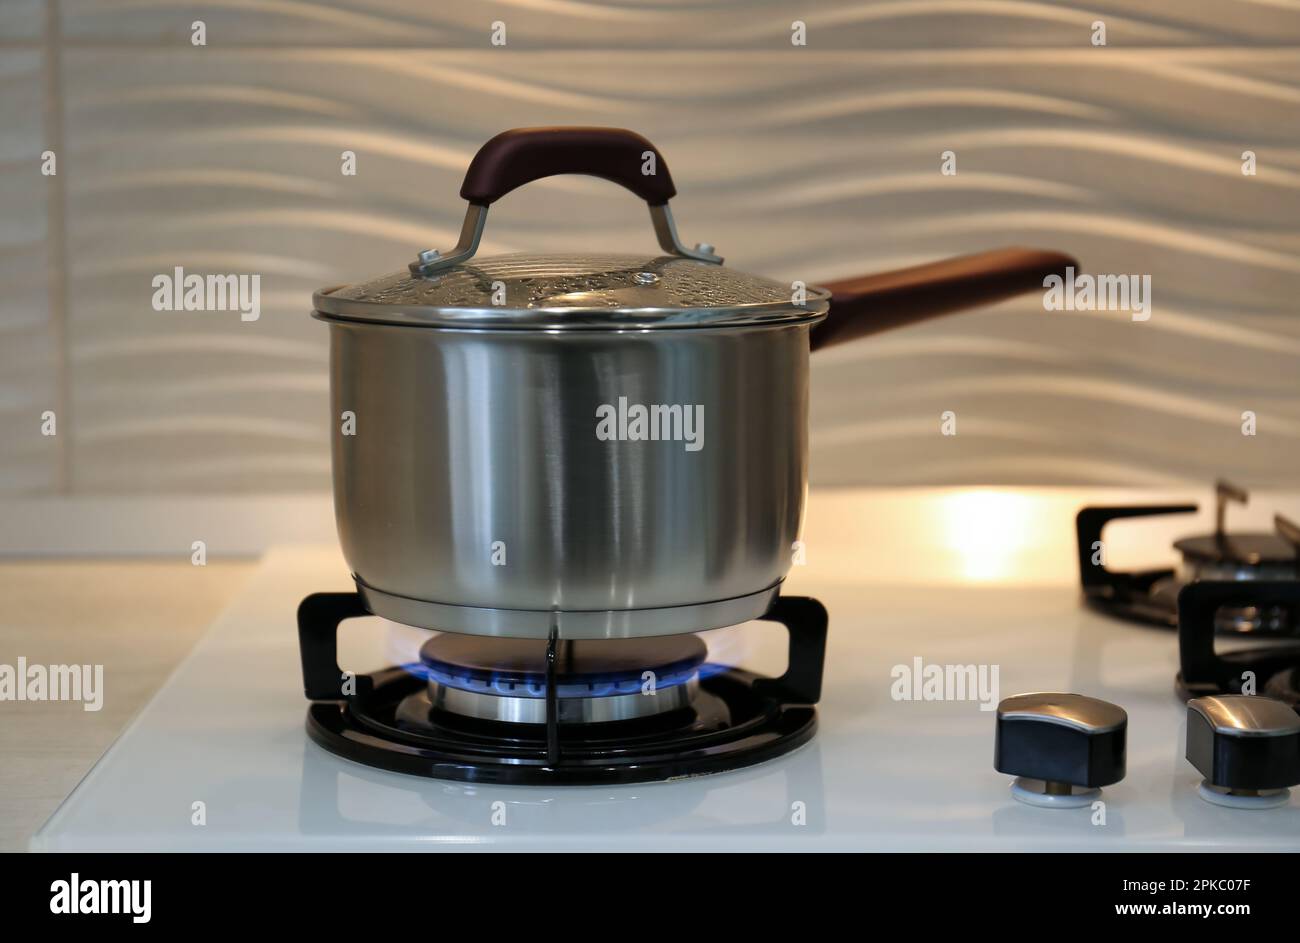 Cooking Pot on Top of Hot Stove Top Burner Stock Image - Image of home,  burner: 207244597